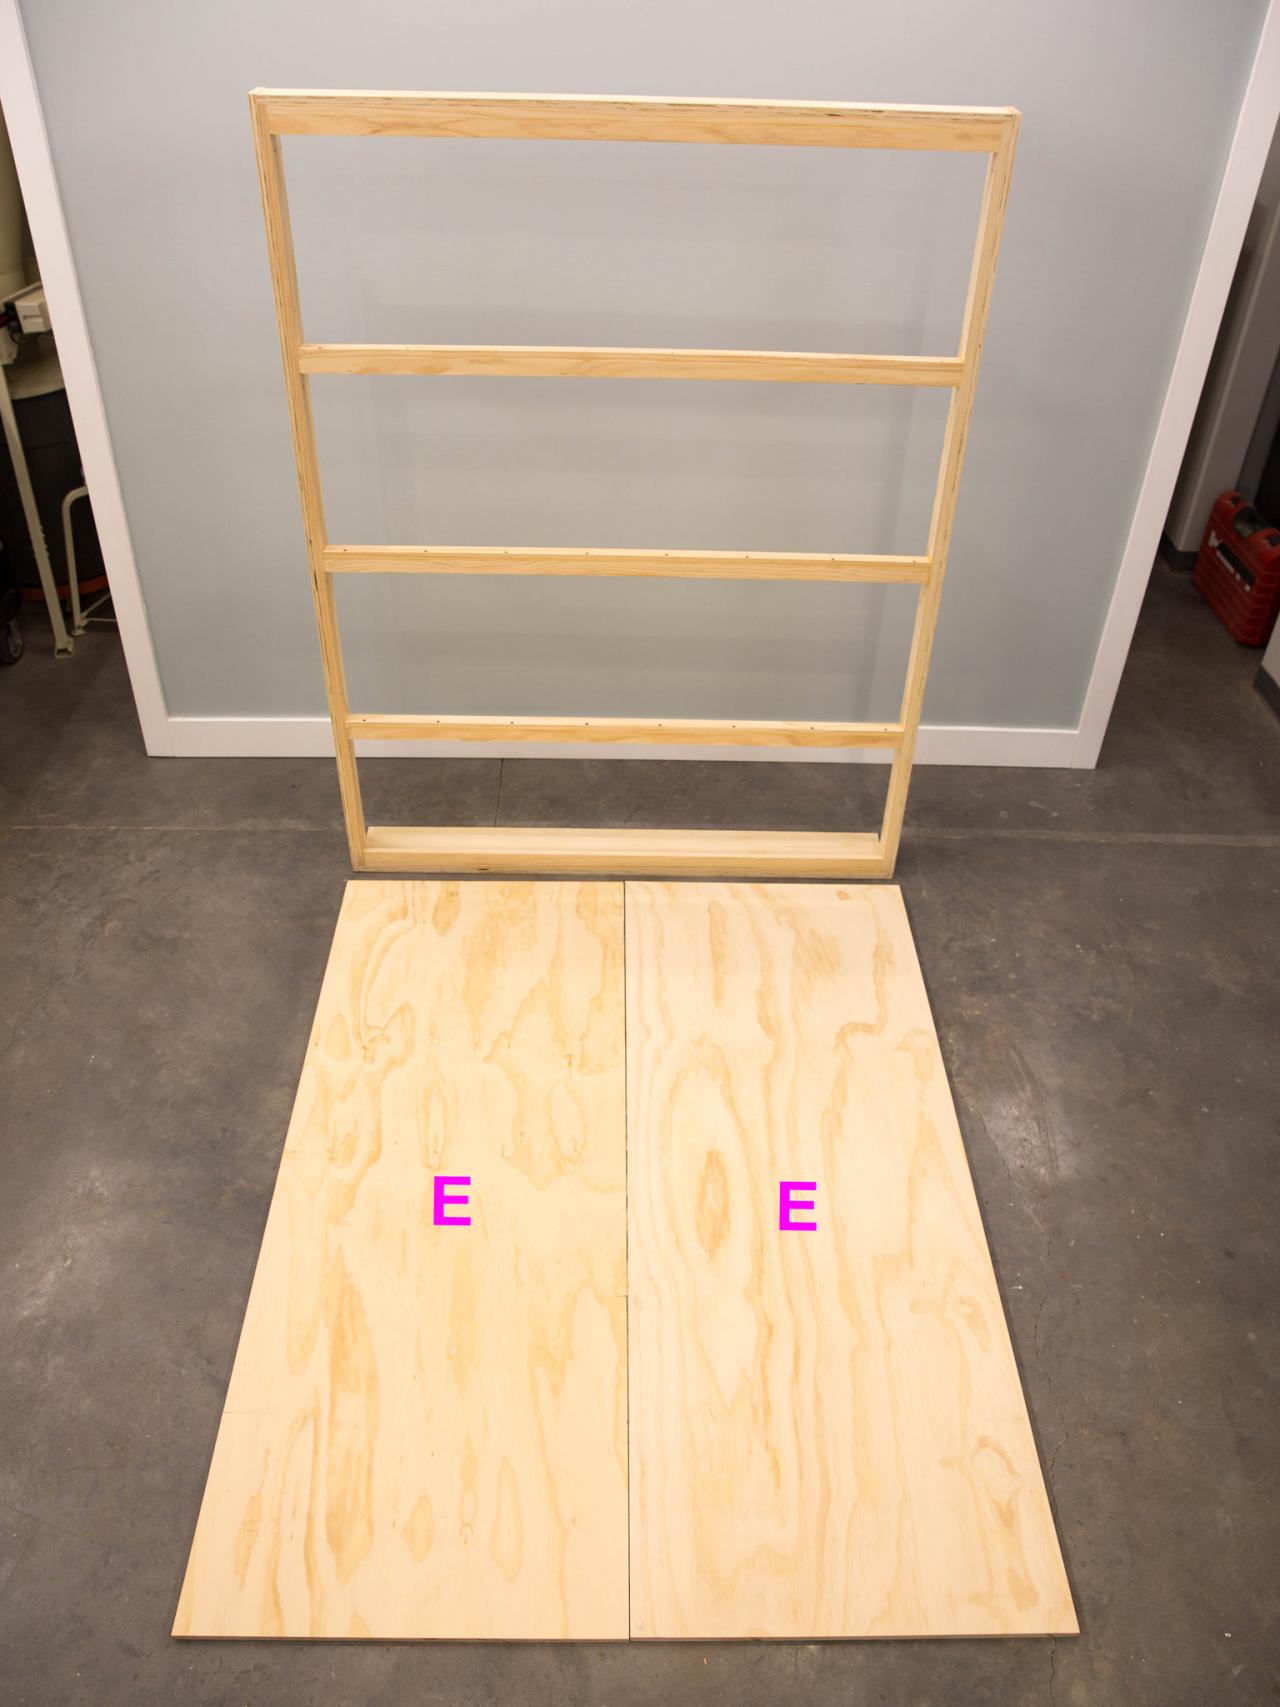 How To Build A Murphy Bed Tos Diy, How To Build A Murphy Bed